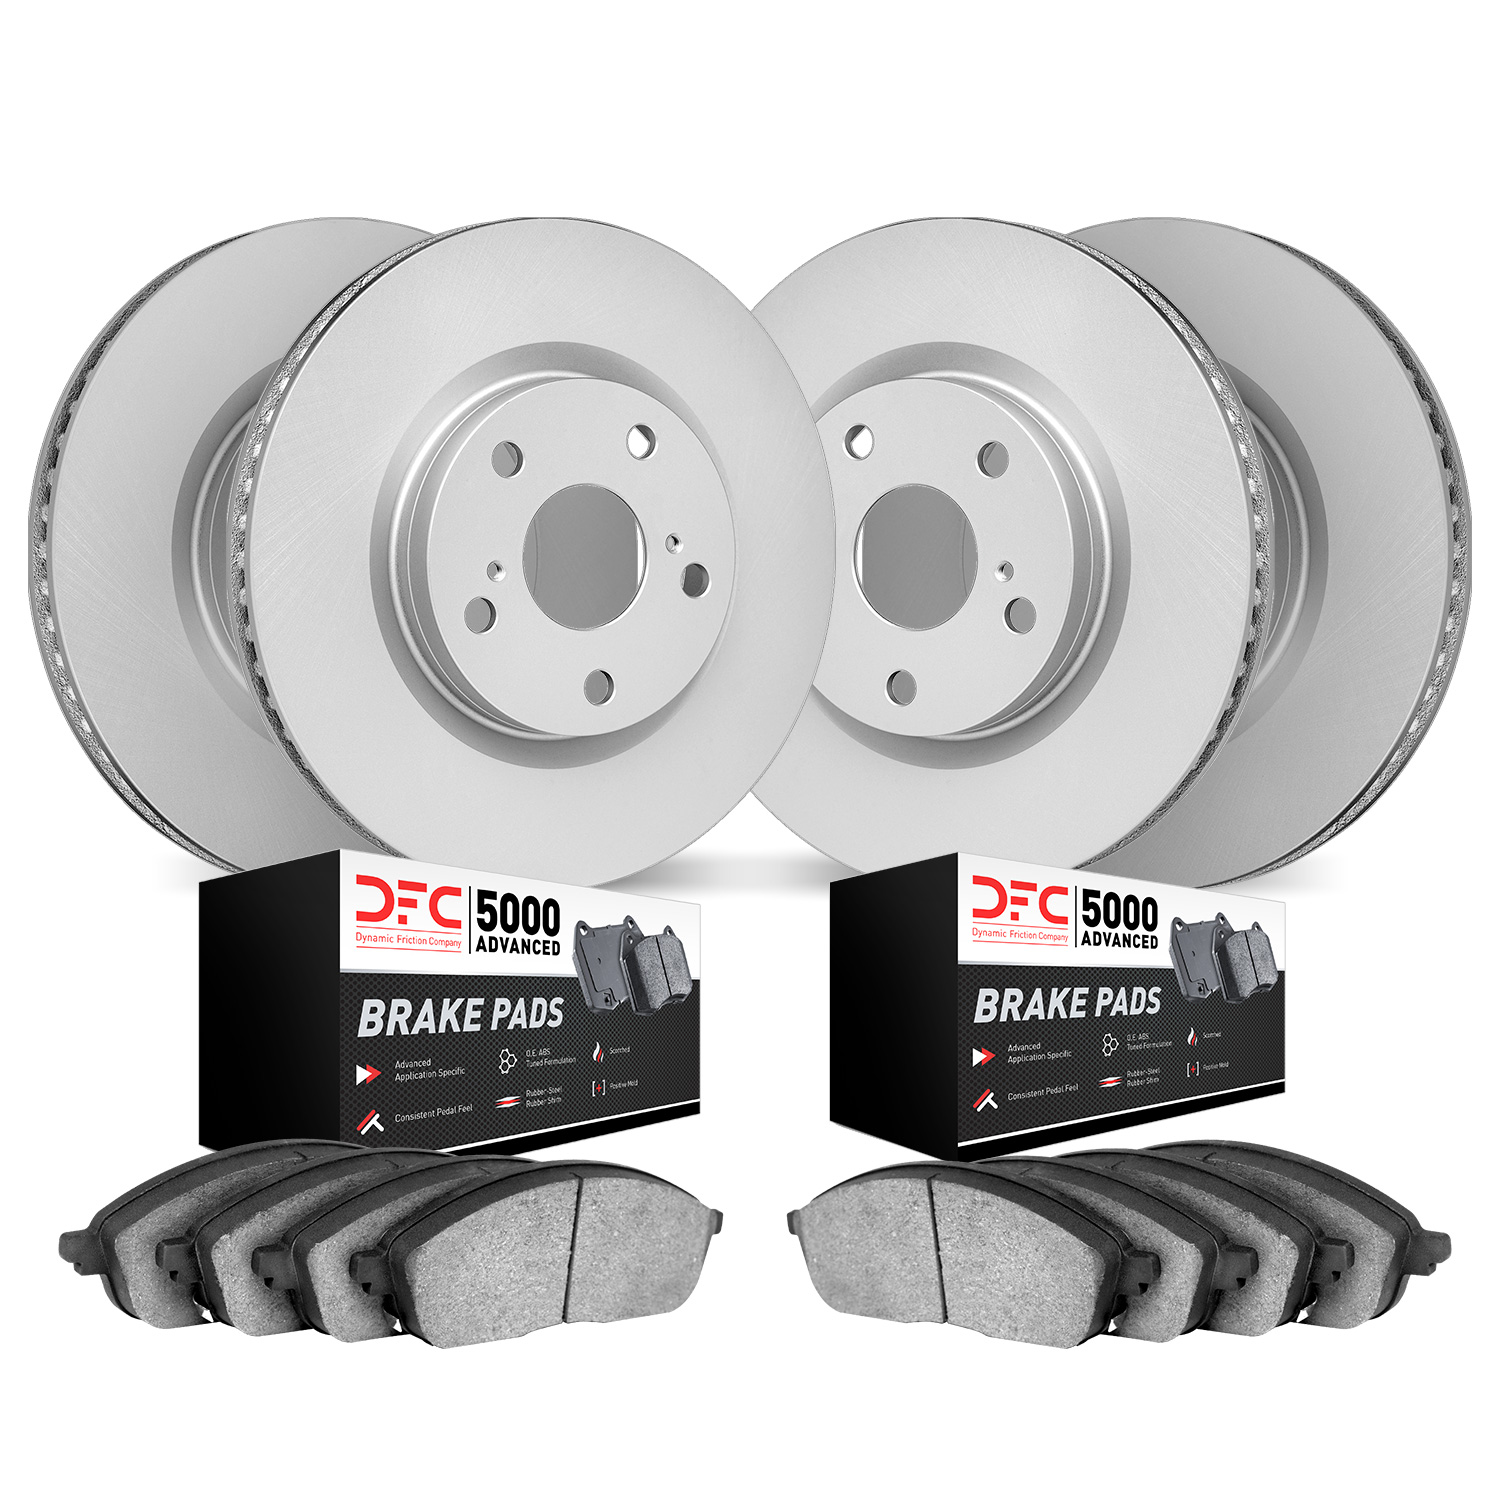 4504-11012 Geospec Brake Rotors w/5000 Advanced Brake Pads Kit, 2010-2016 Land Rover, Position: Front and Rear